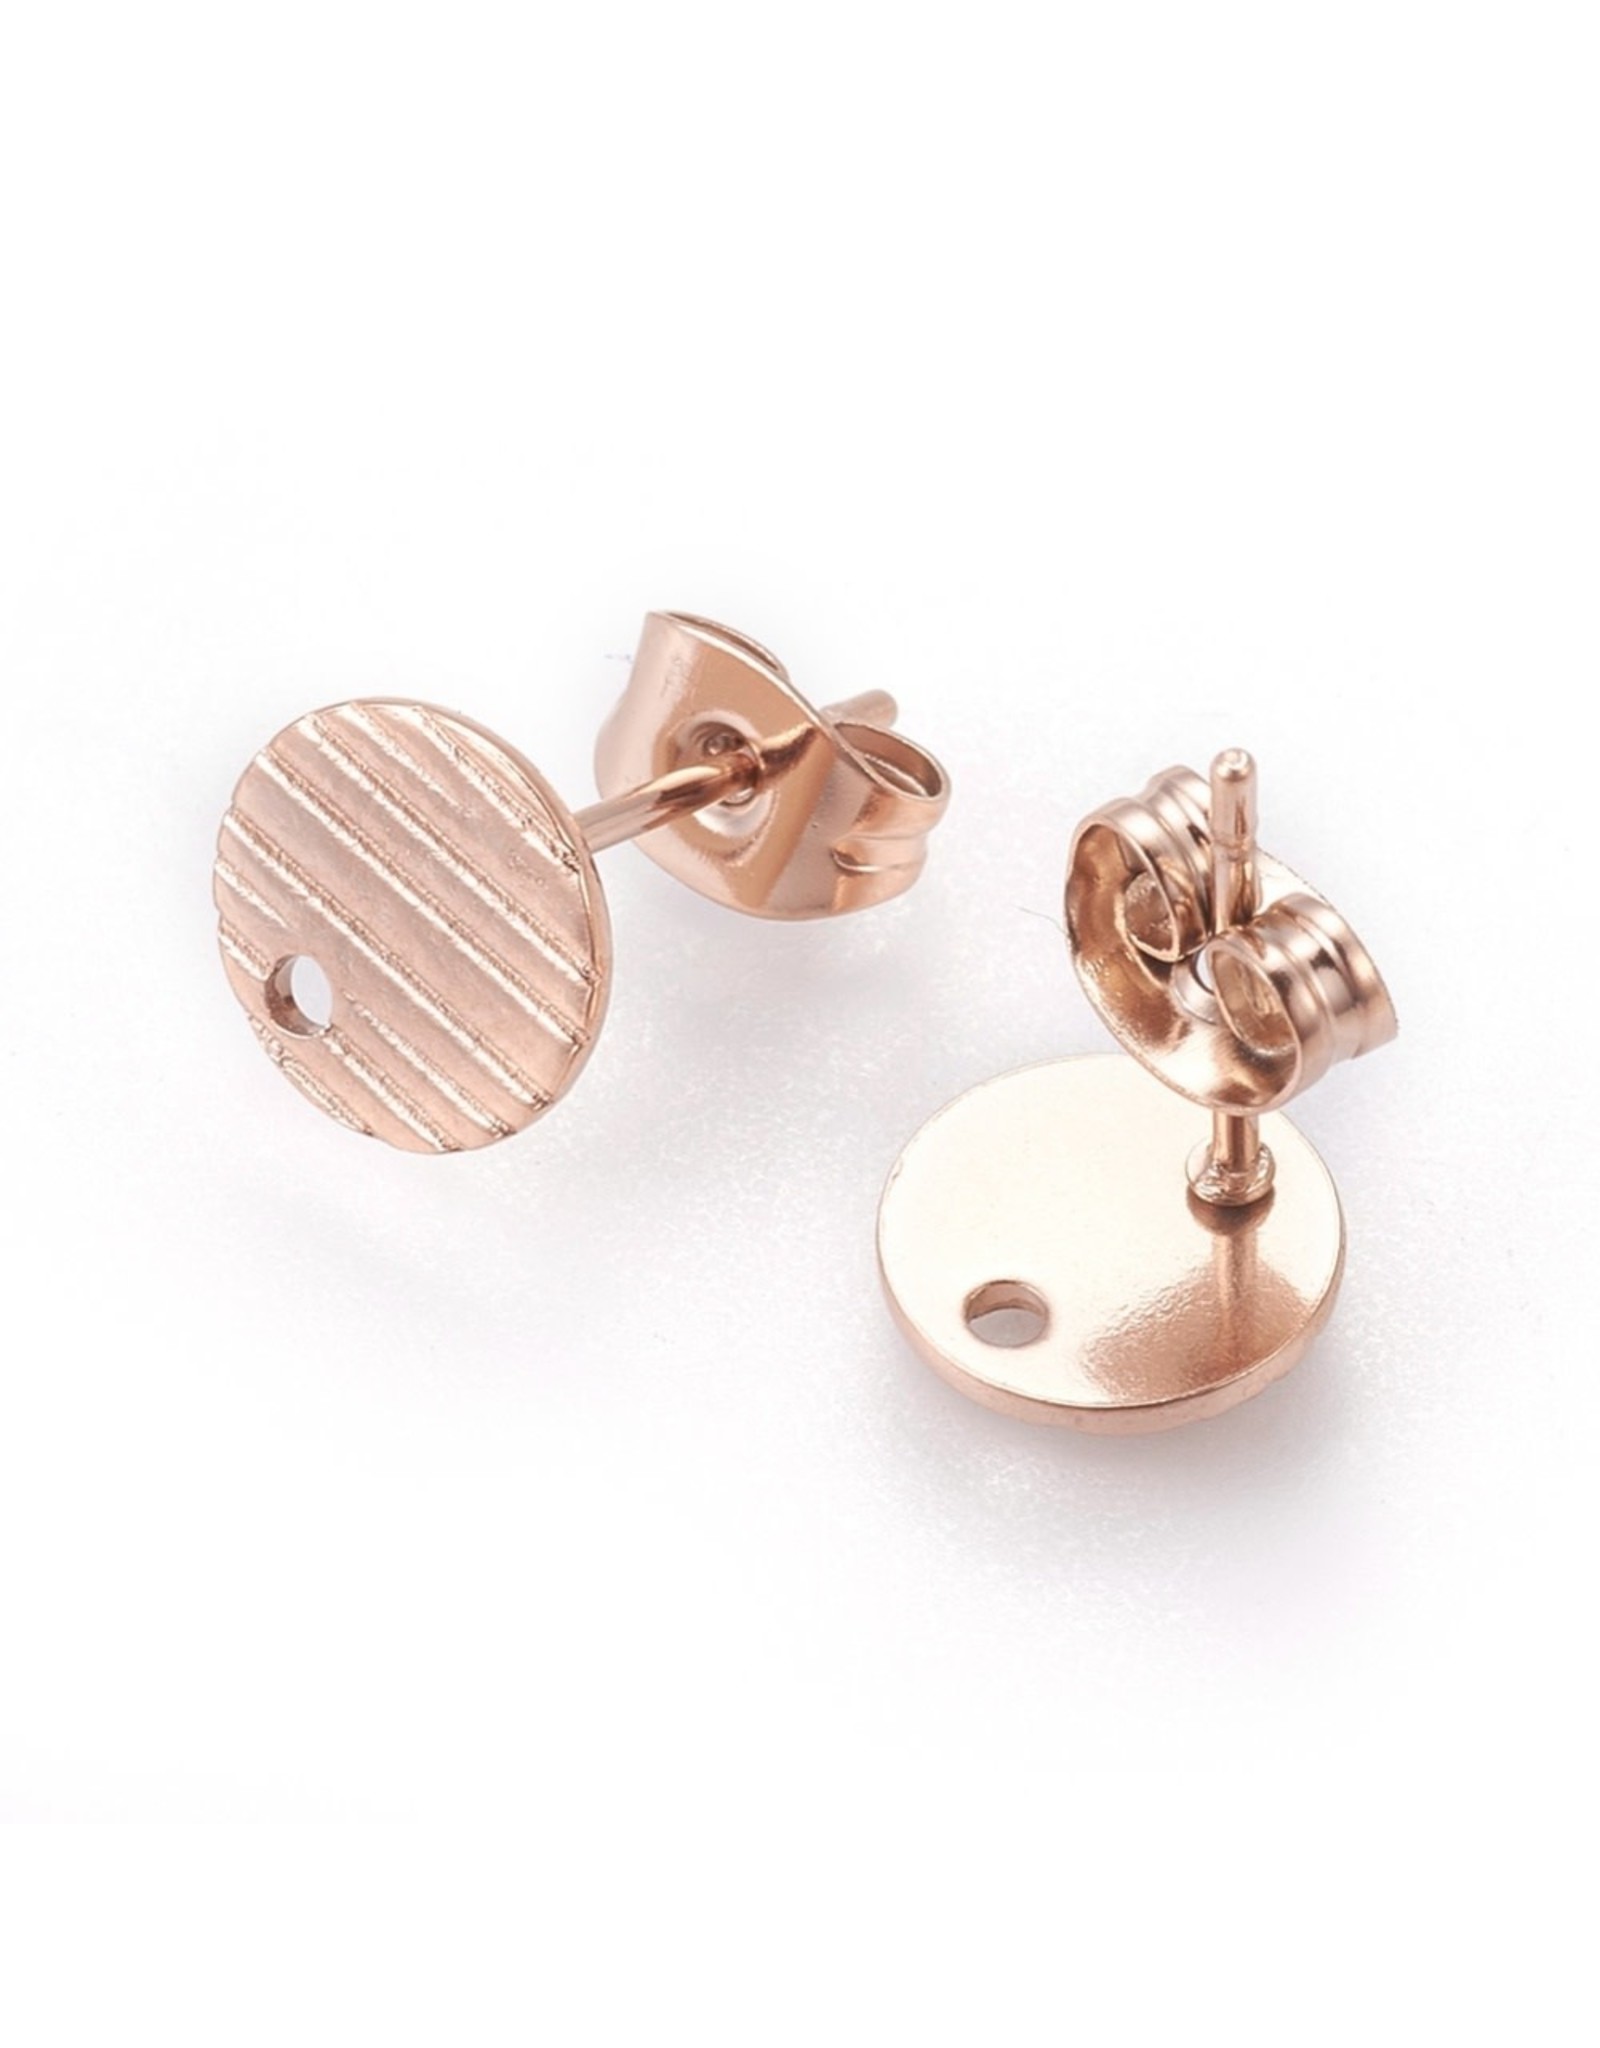 Earring Stud Textured Flat Round 8mm  Rose Gold Stainless Steel  NF x2